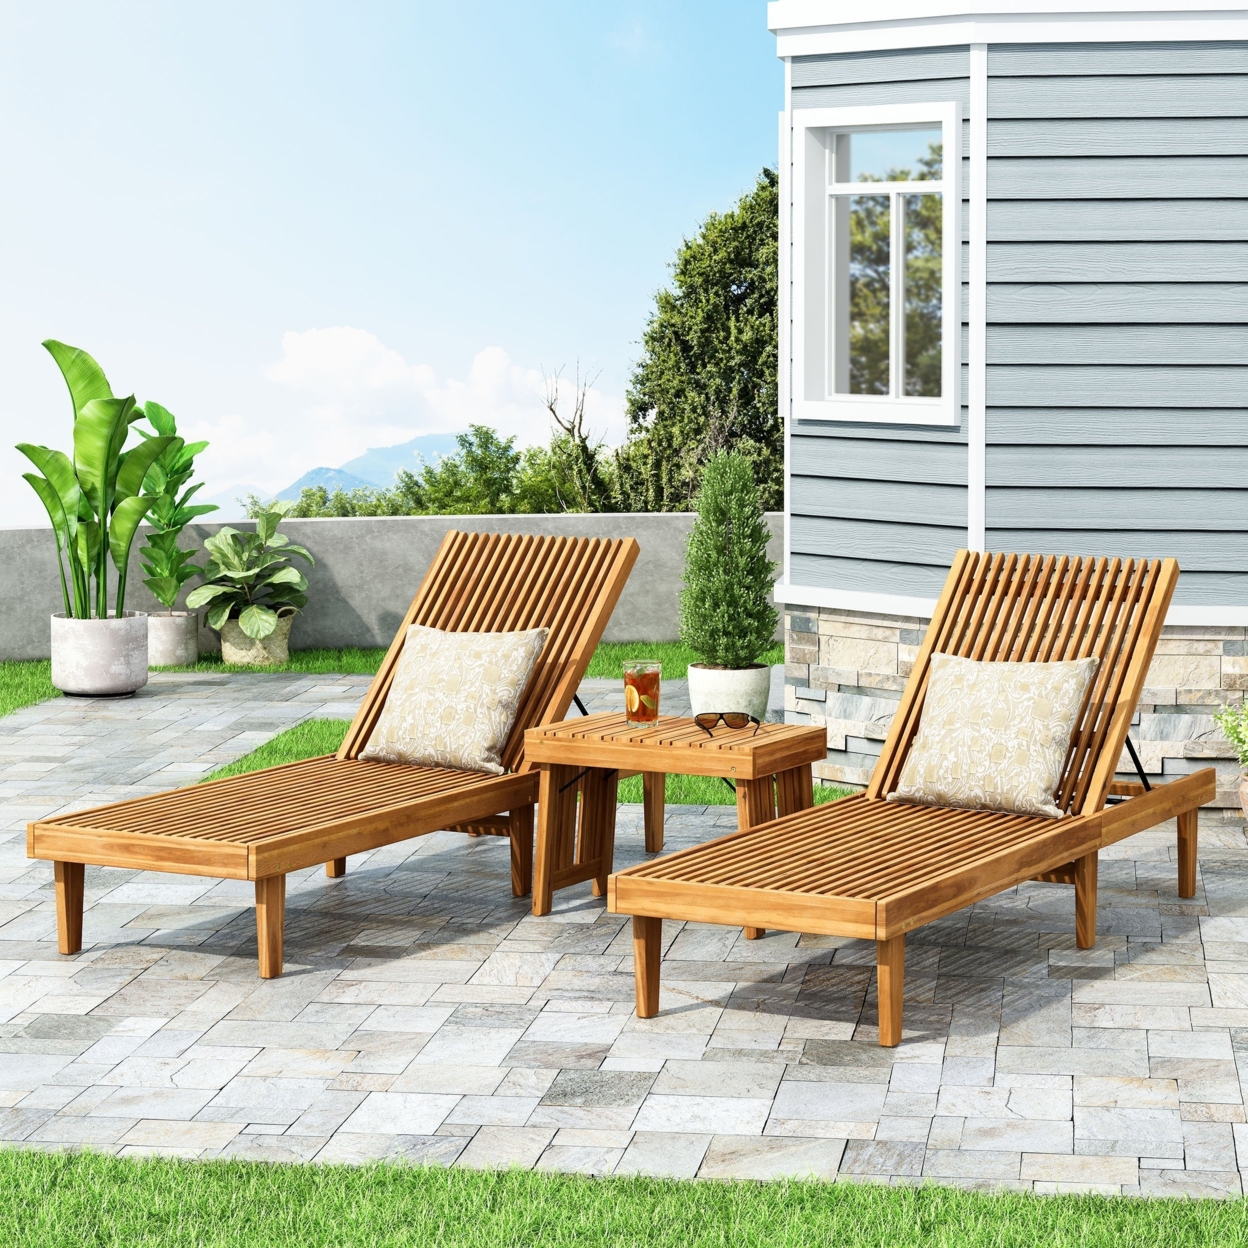 Addisyn Outdoor Acacia Wood 3 Piece Chaise Lounge Set - Gray